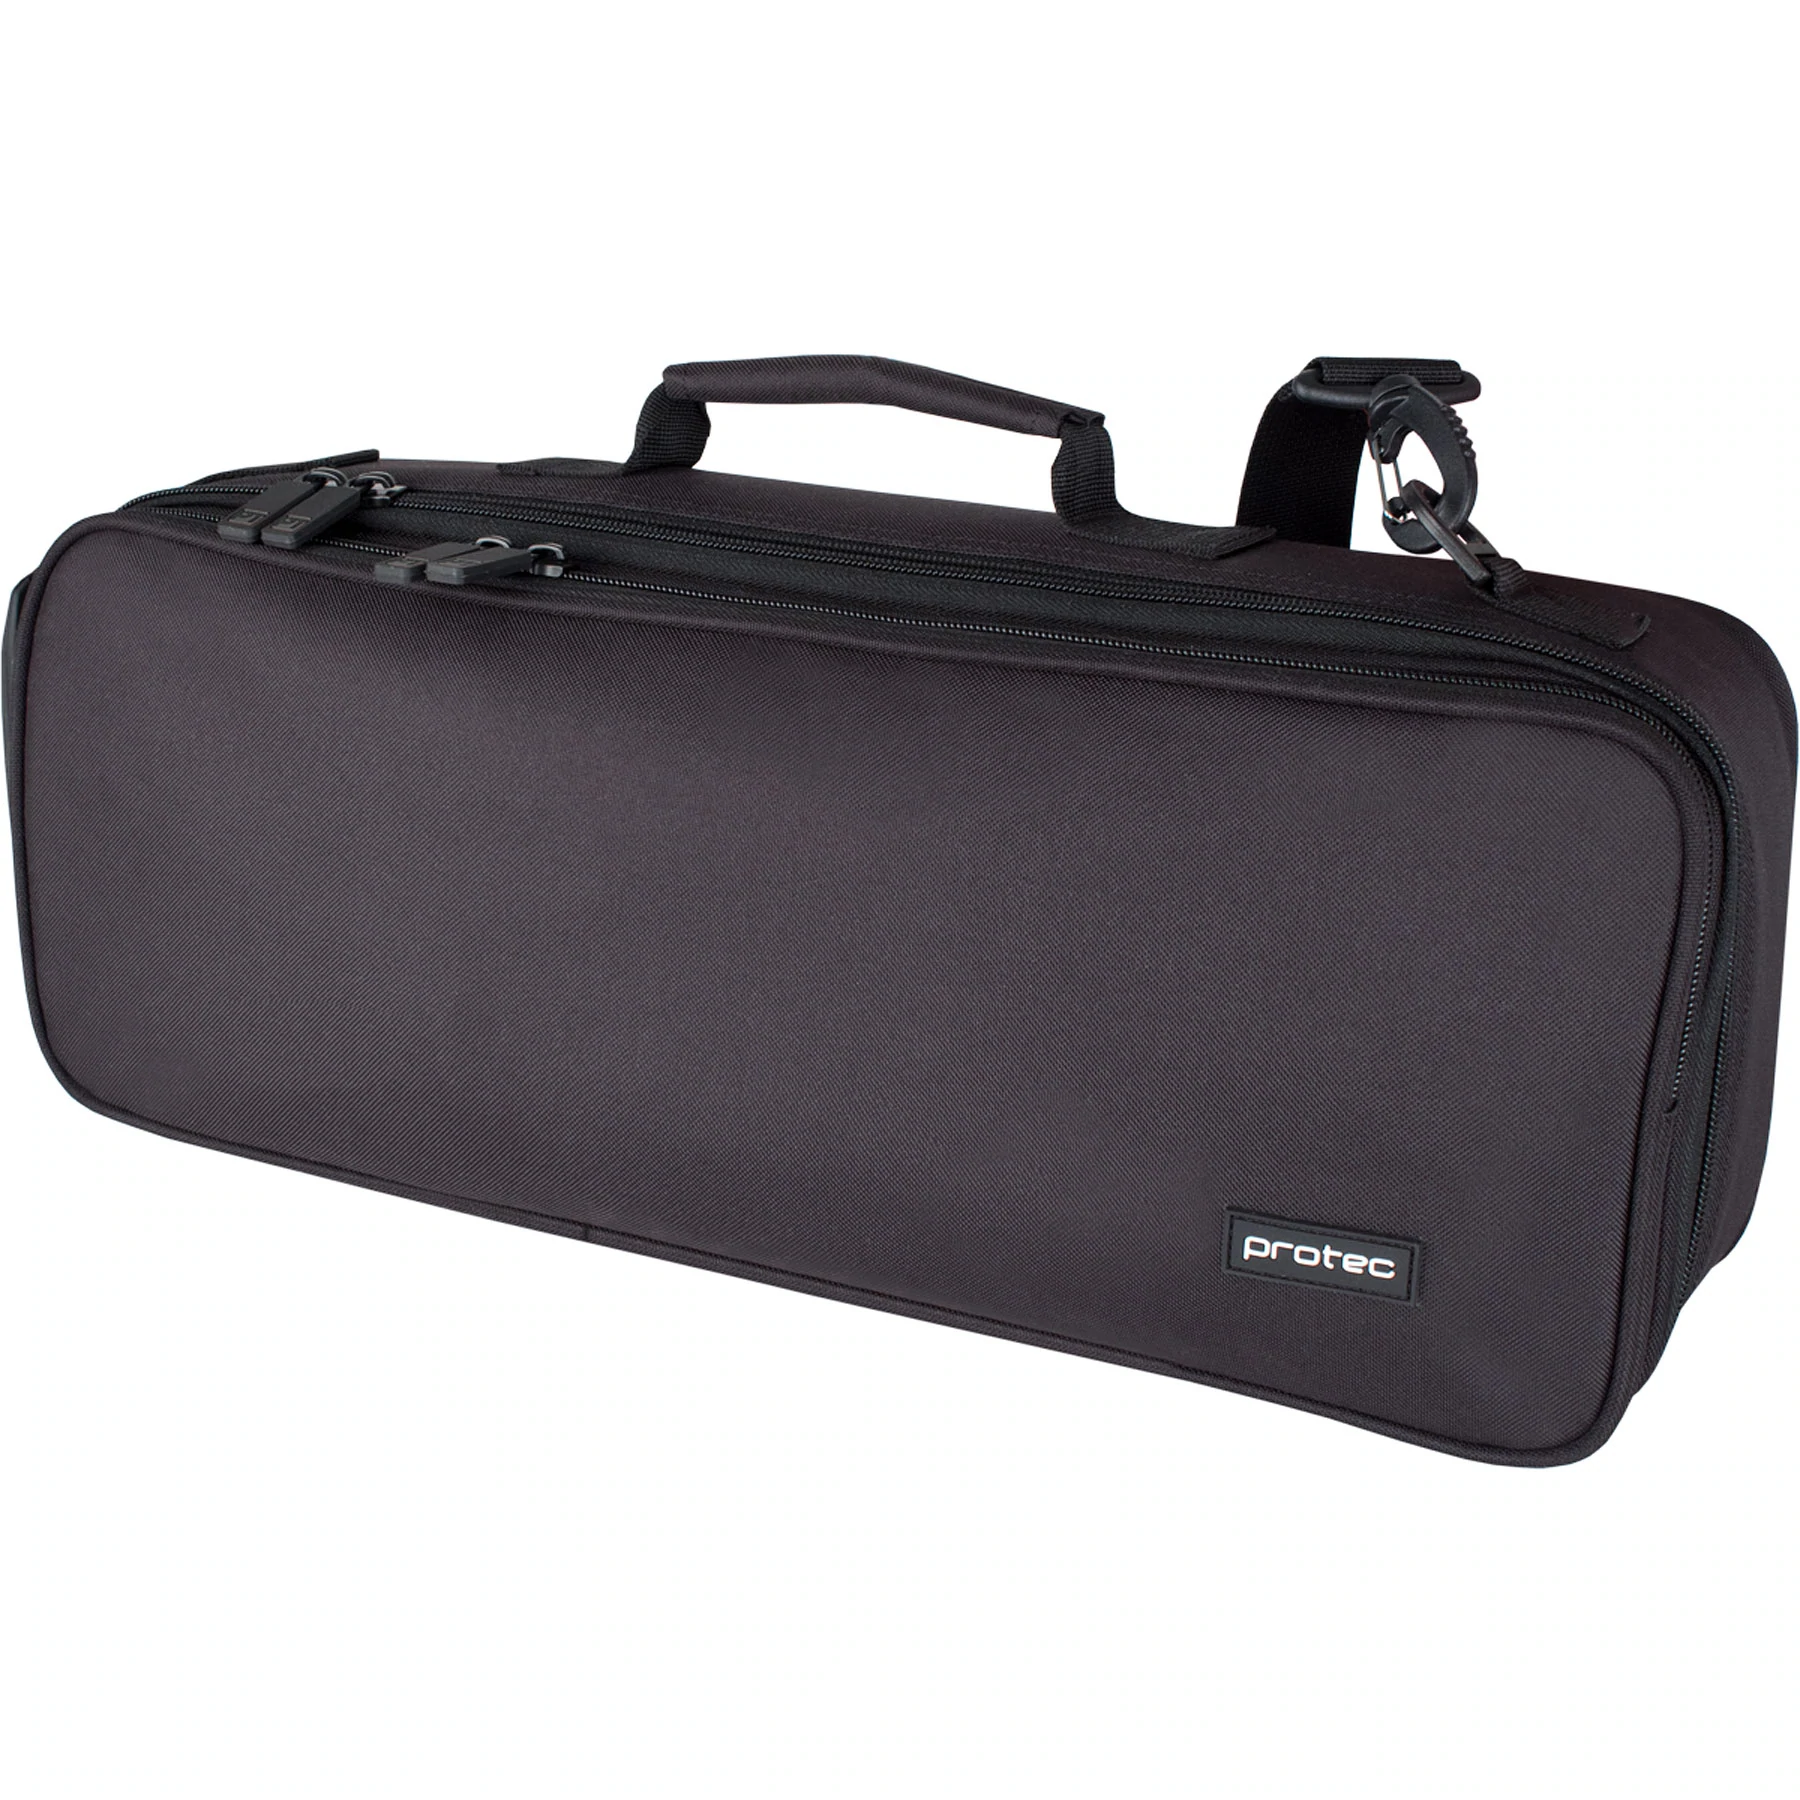 PROTEC Insulated Cover 18 x 7 x 3" (Fits BM308PICC Case)